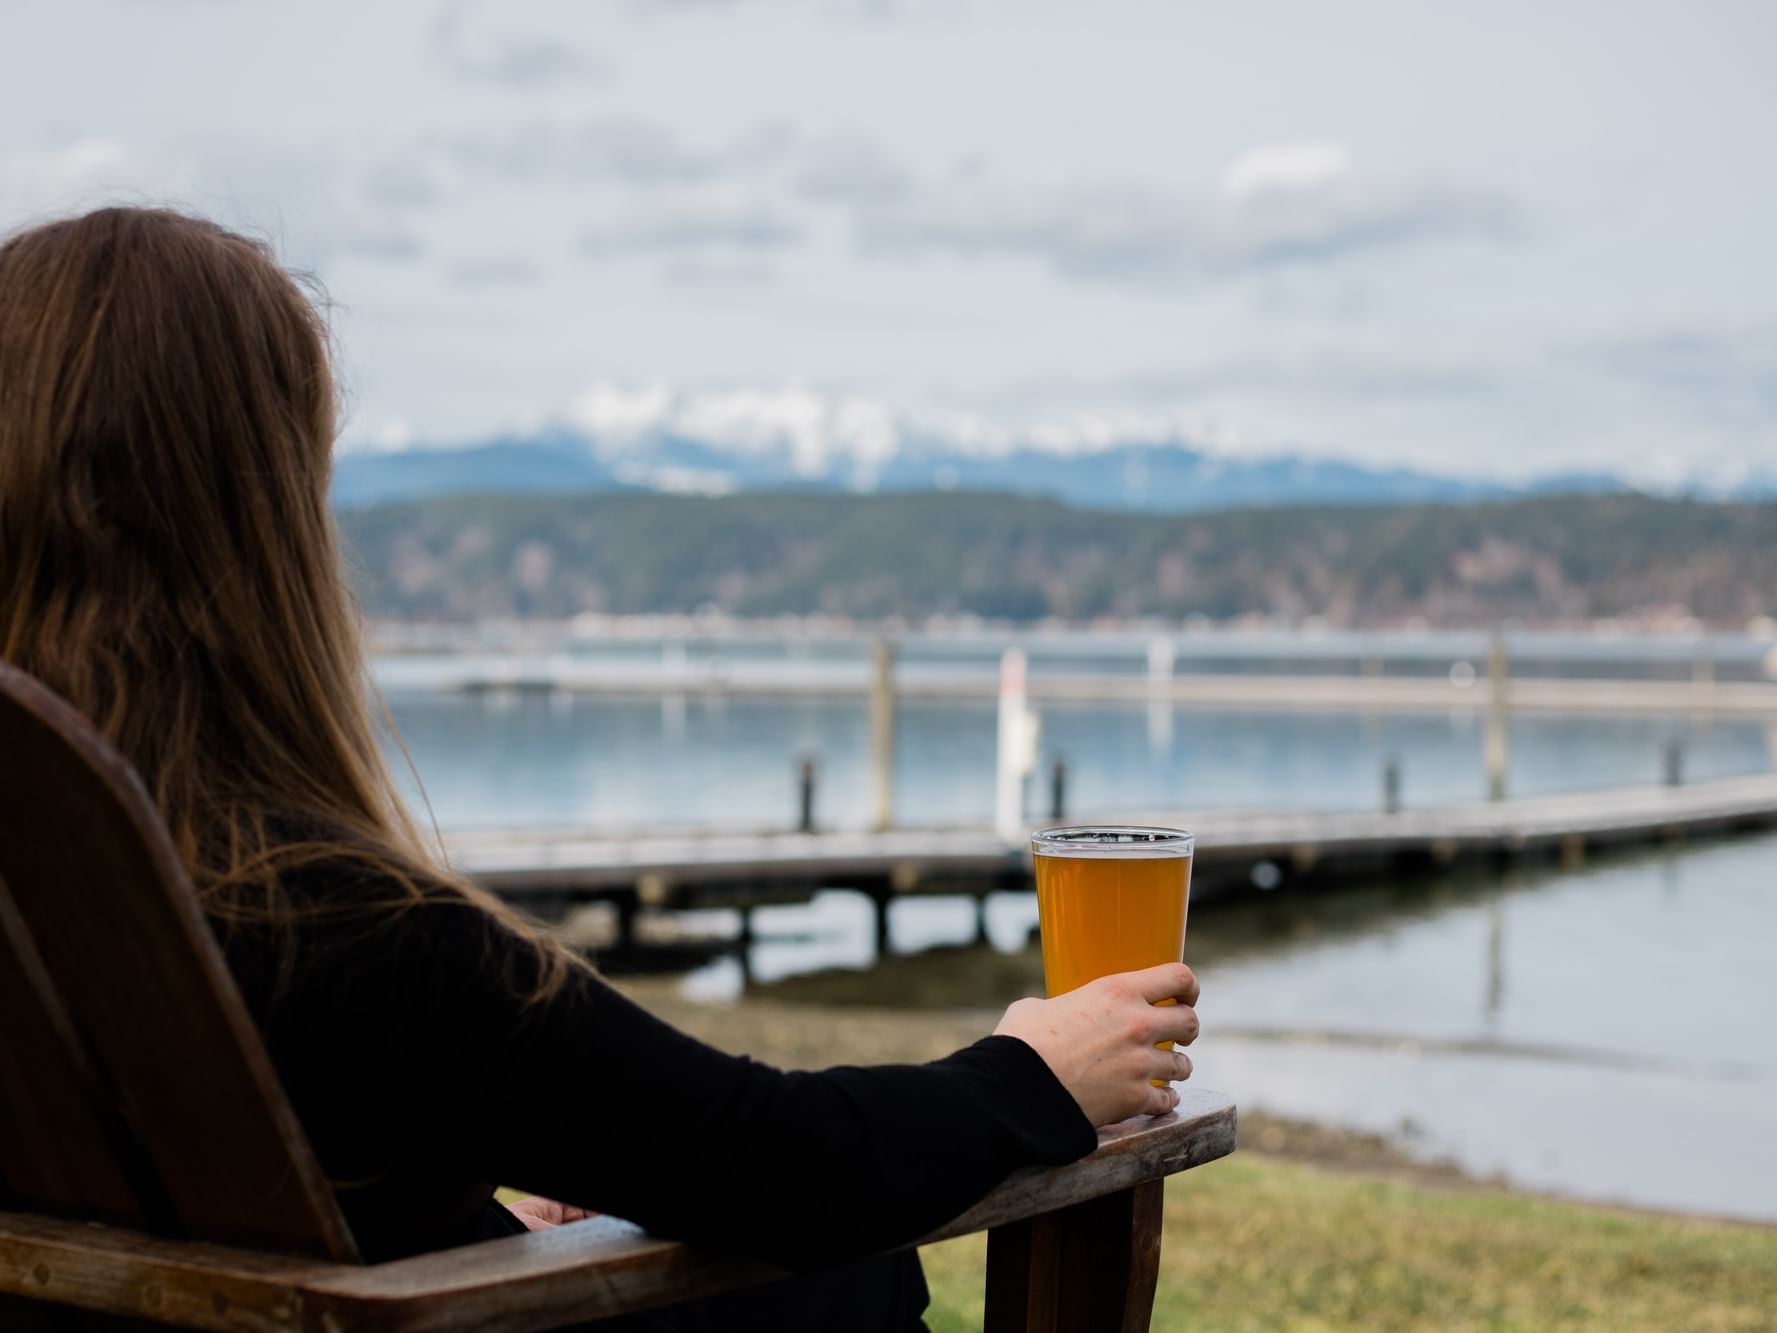 A lady watching the lake while holding a beer at Alderbrook Resort & Spa